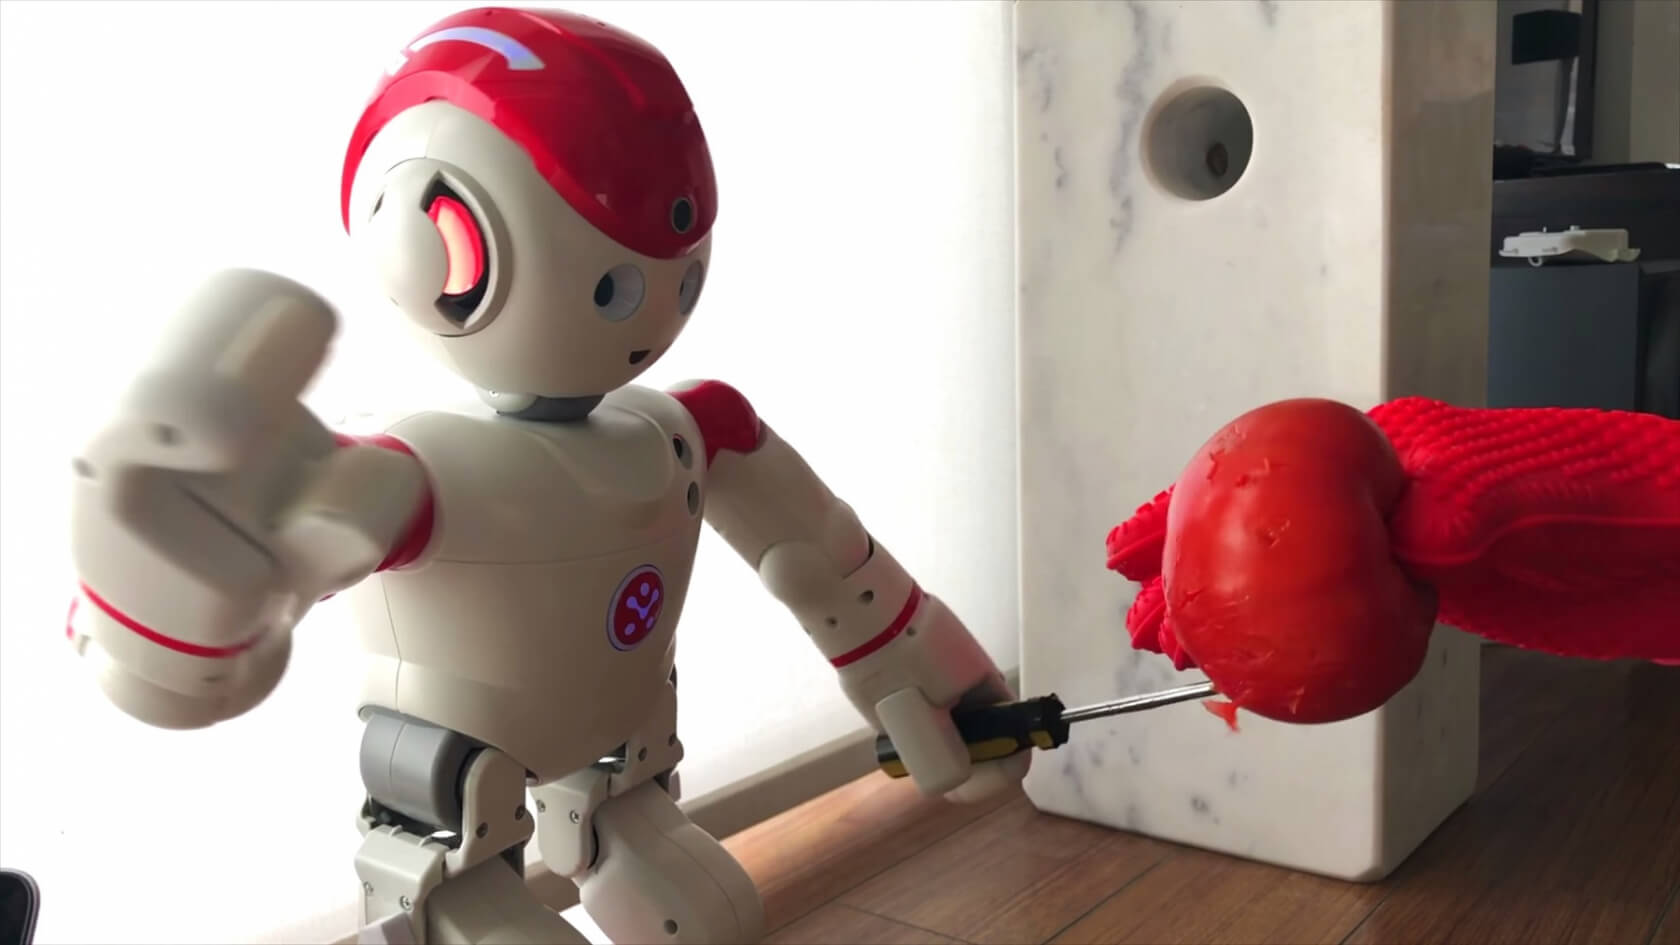 Researchers' hack shows potential dangers of home and industrial robots